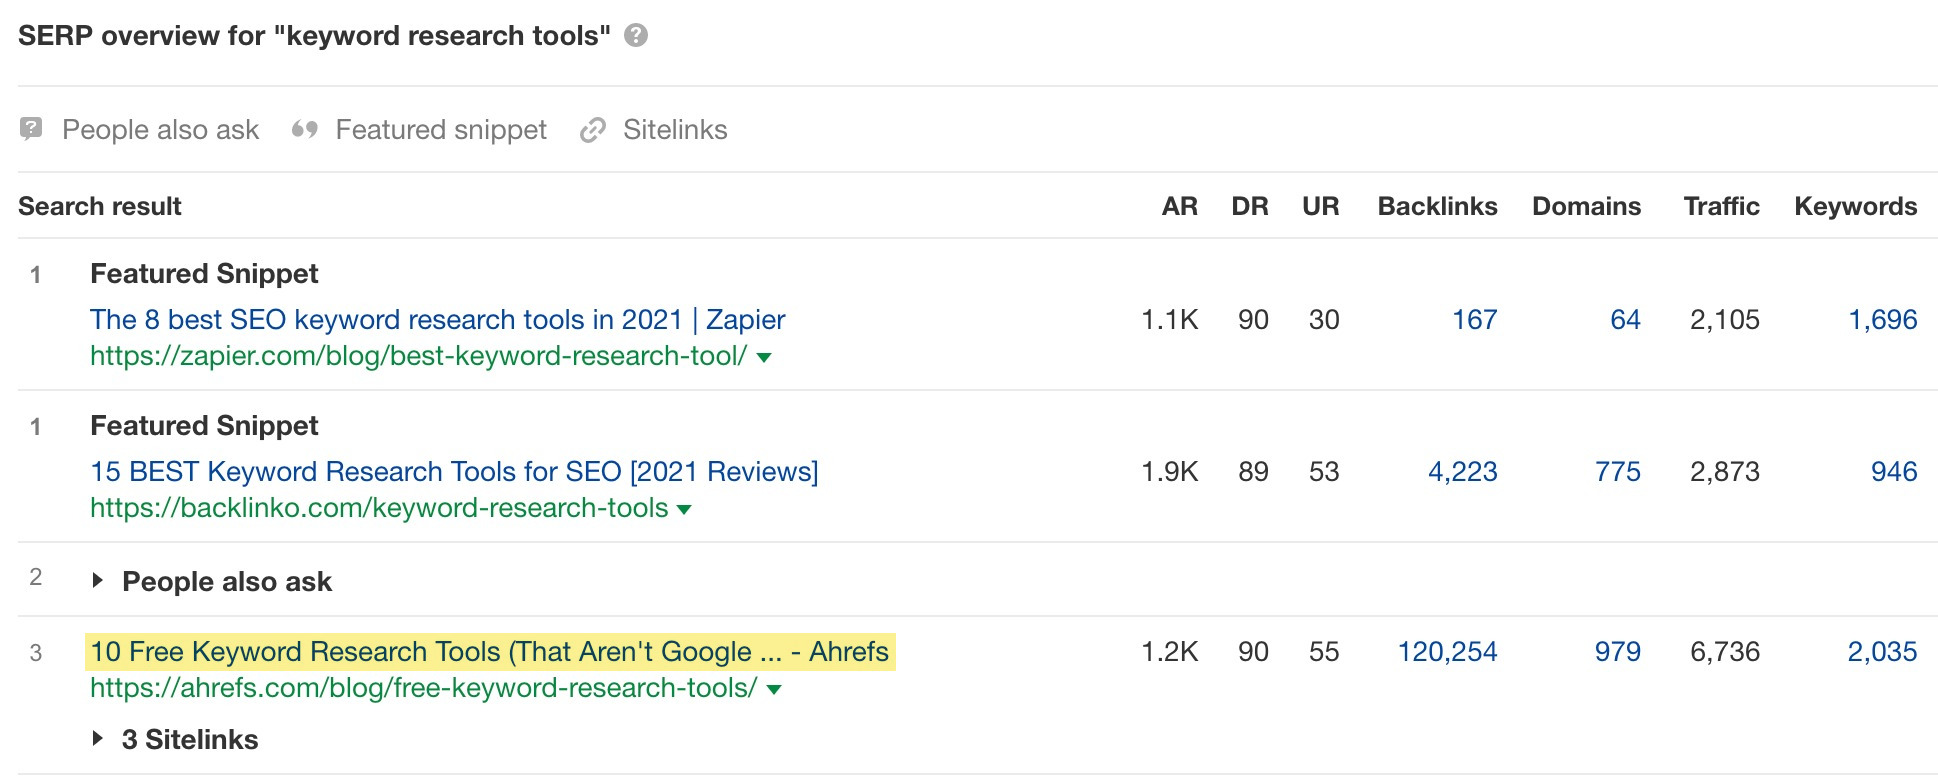 SERP overview of "keyword research tools"